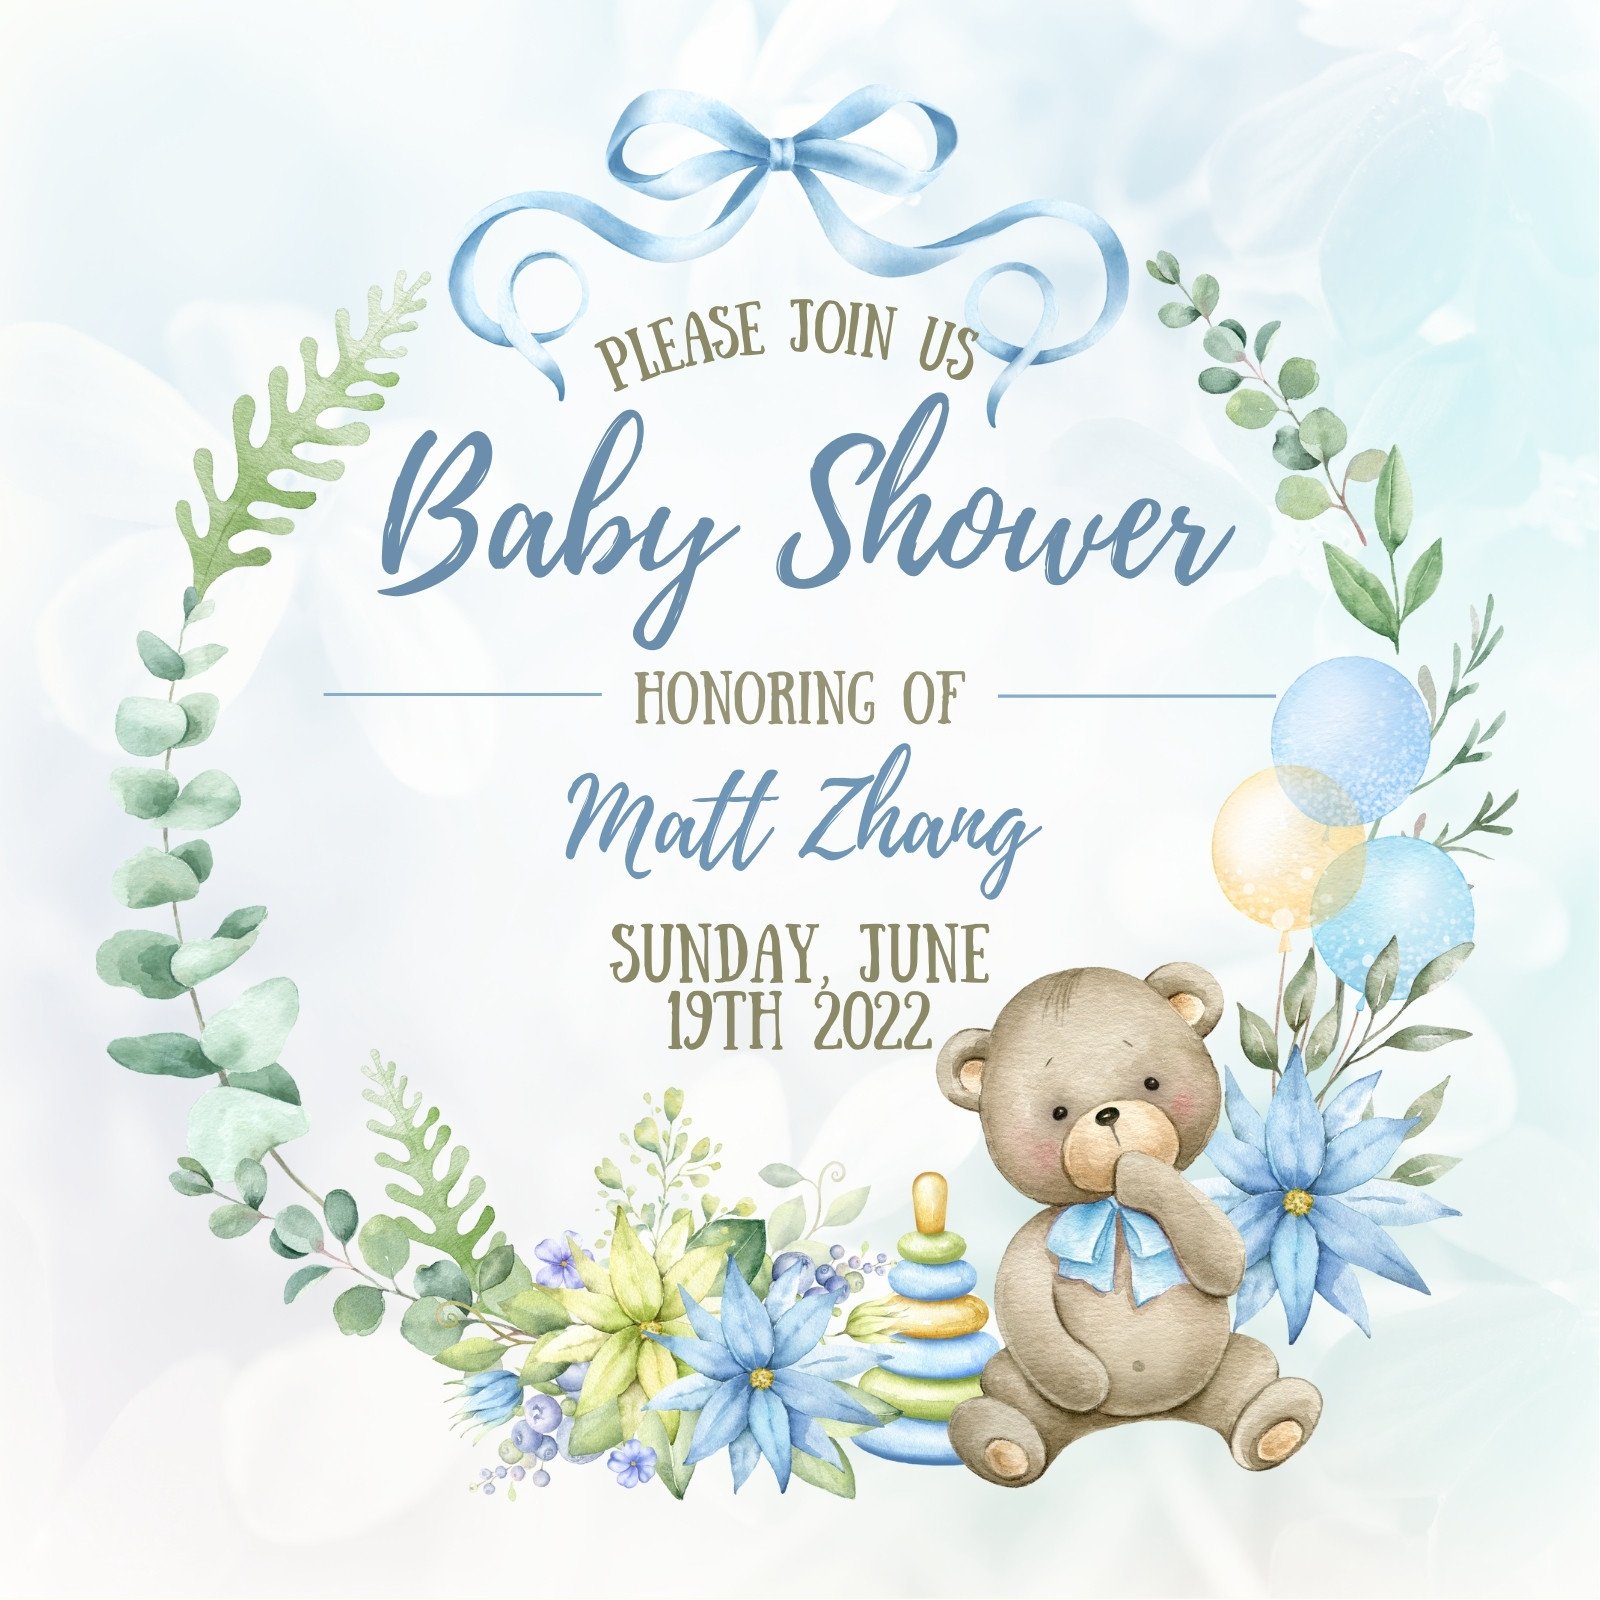 Canva White And Blue Watercolor Floral Baby Shower Invitation ZKYhsT6s5aY 